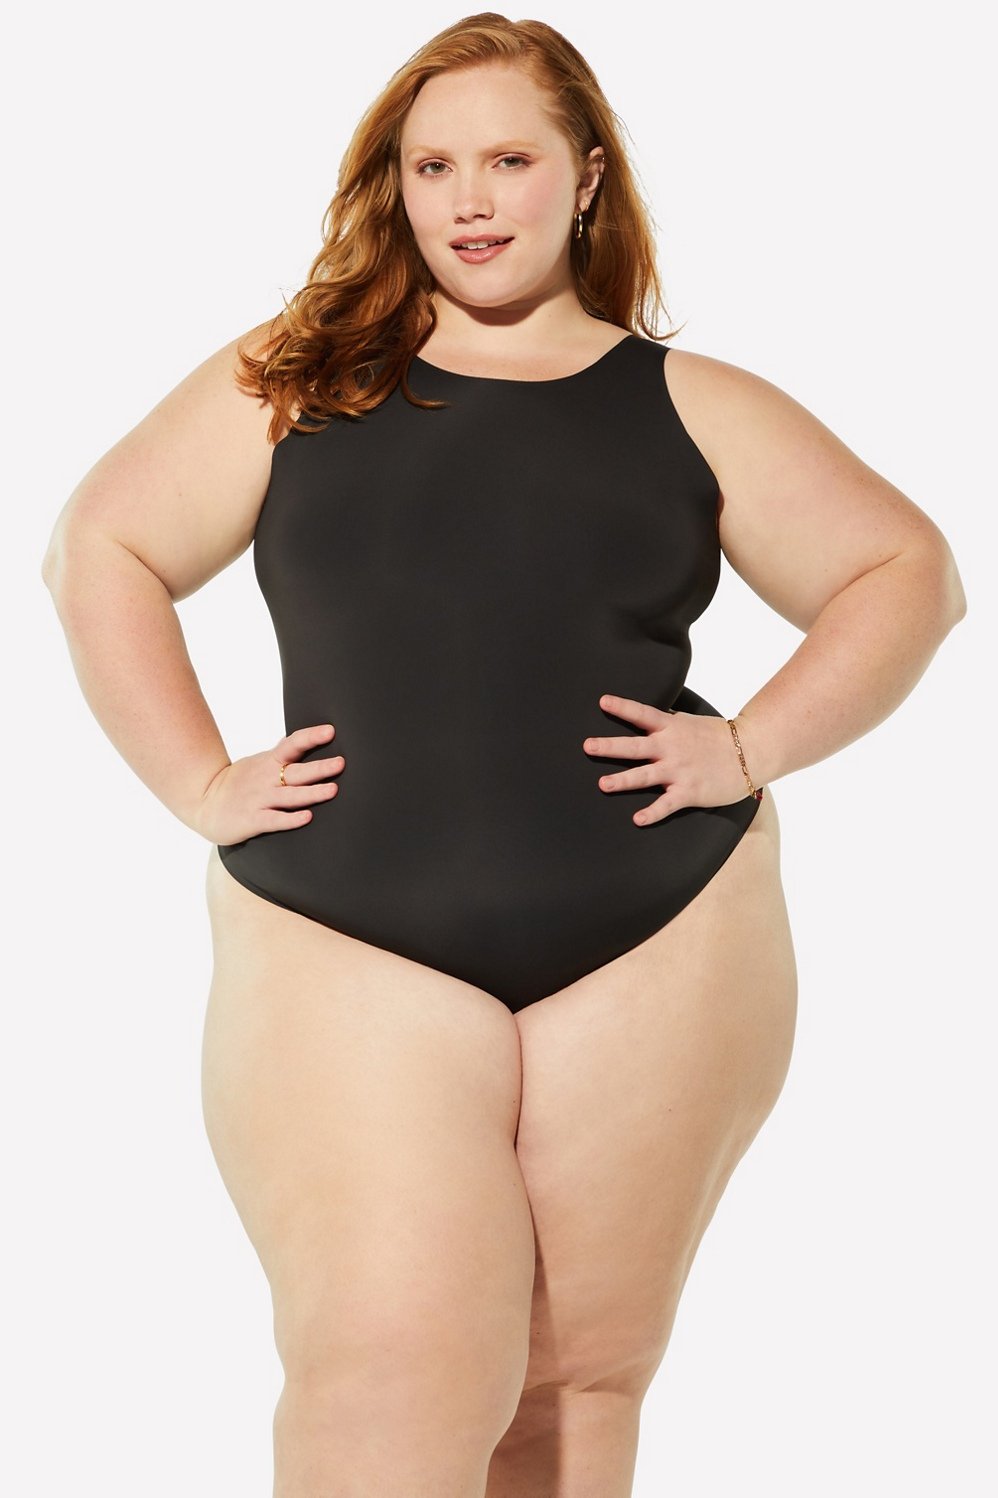 Fabletics Yitty Mesh Me Smoothing Sleeved Thong Bodysuit Size 2X - $75 -  From Caroline